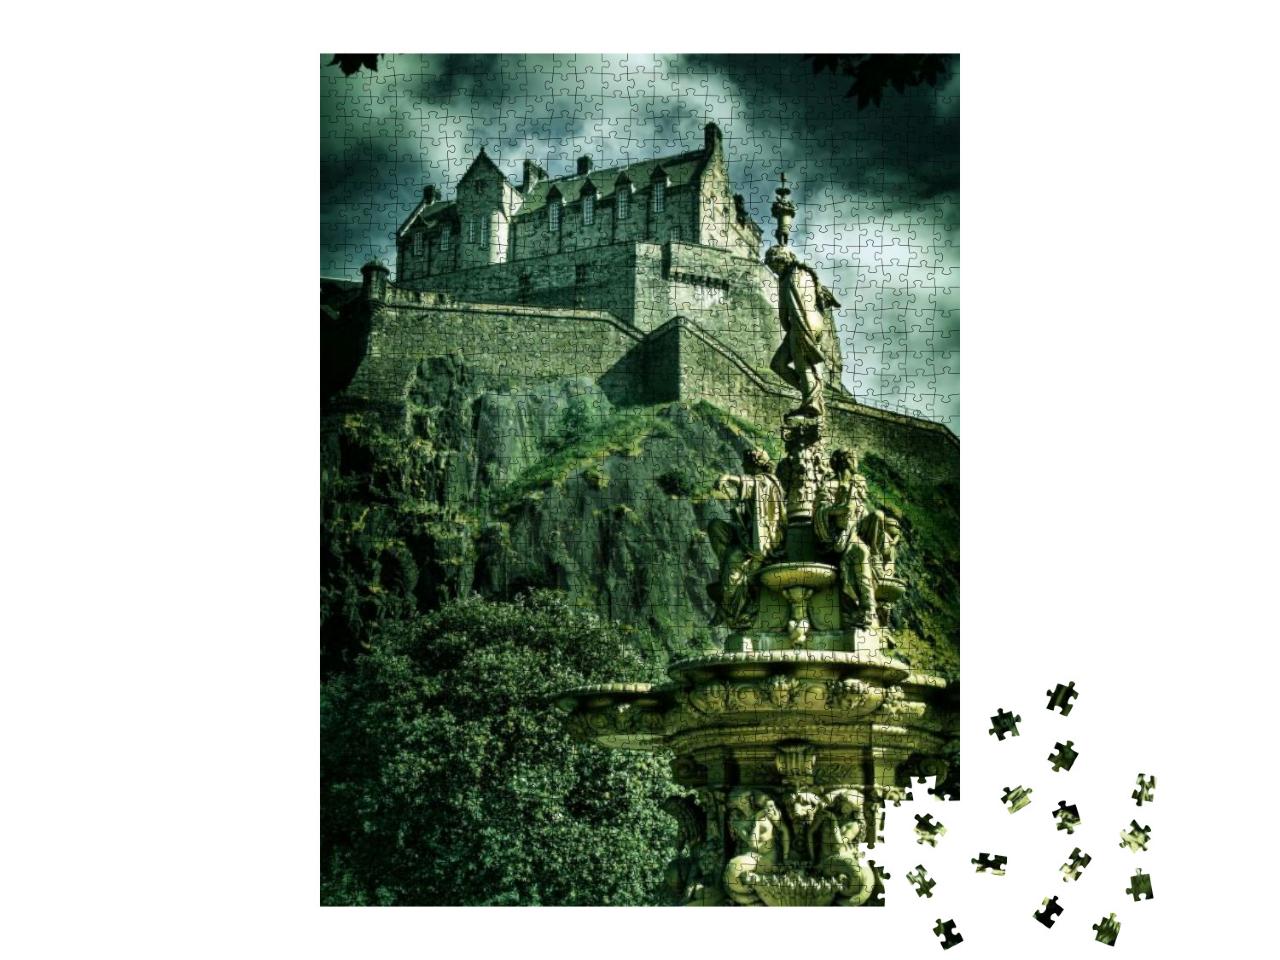 Shot of Edinburgh Castle with Vintage Look... Jigsaw Puzzle with 1000 pieces